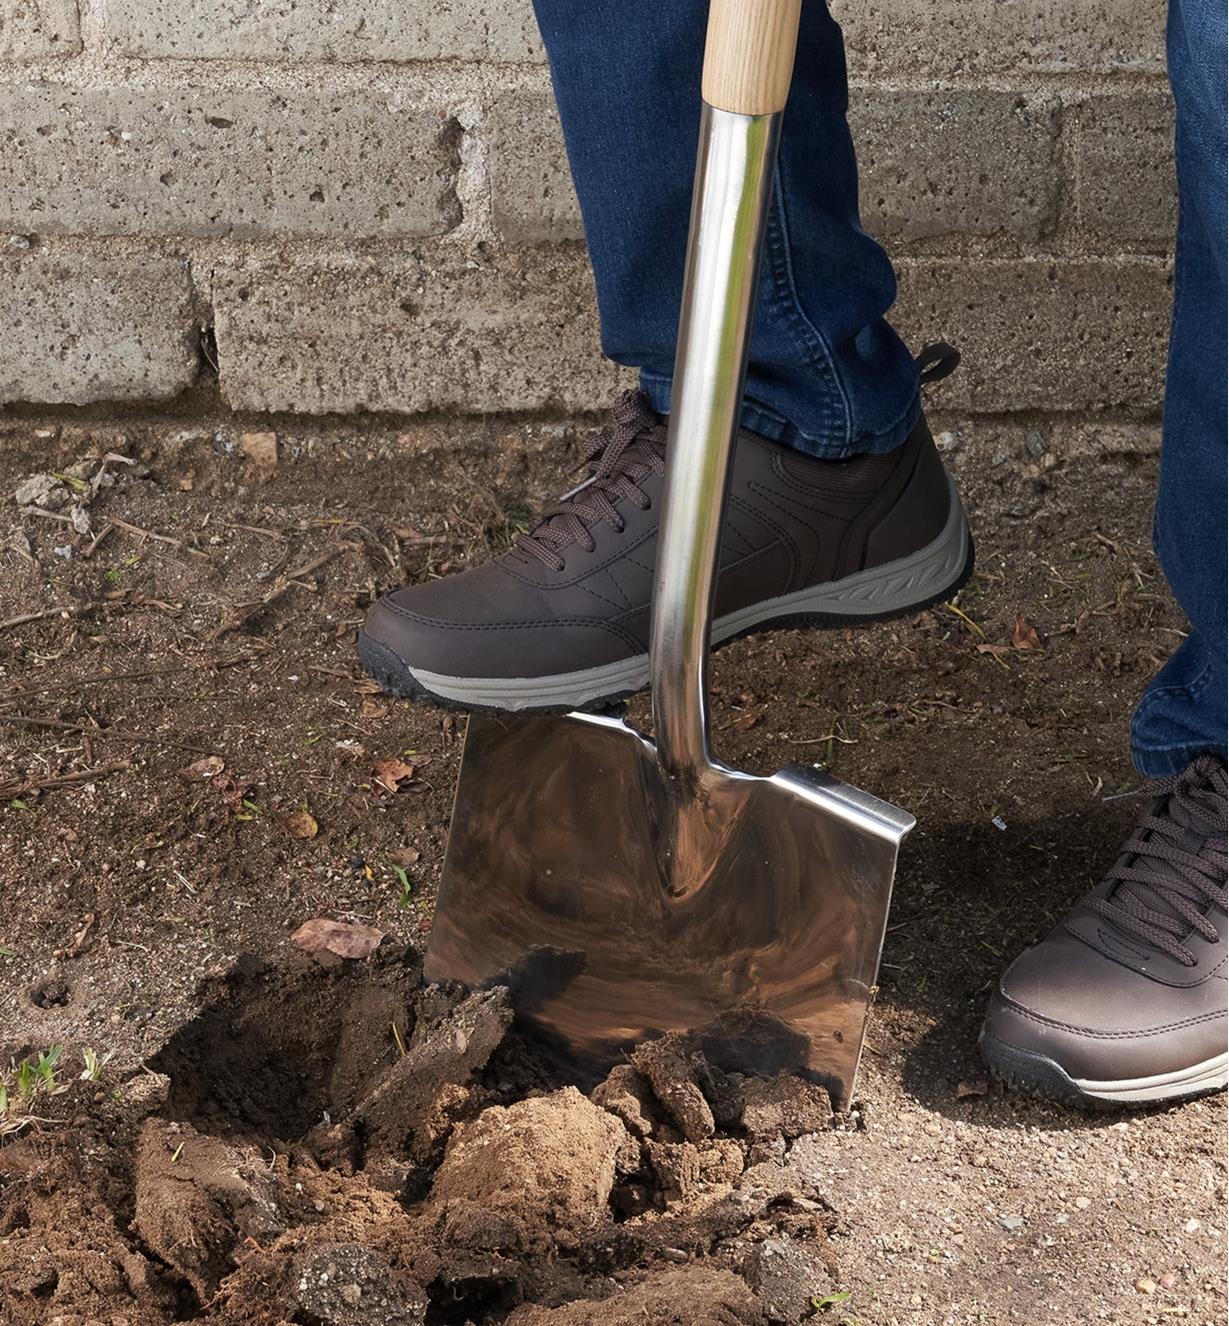 A gardener uses their foot on a foot tread to push the stainless-steel shovel into the ground